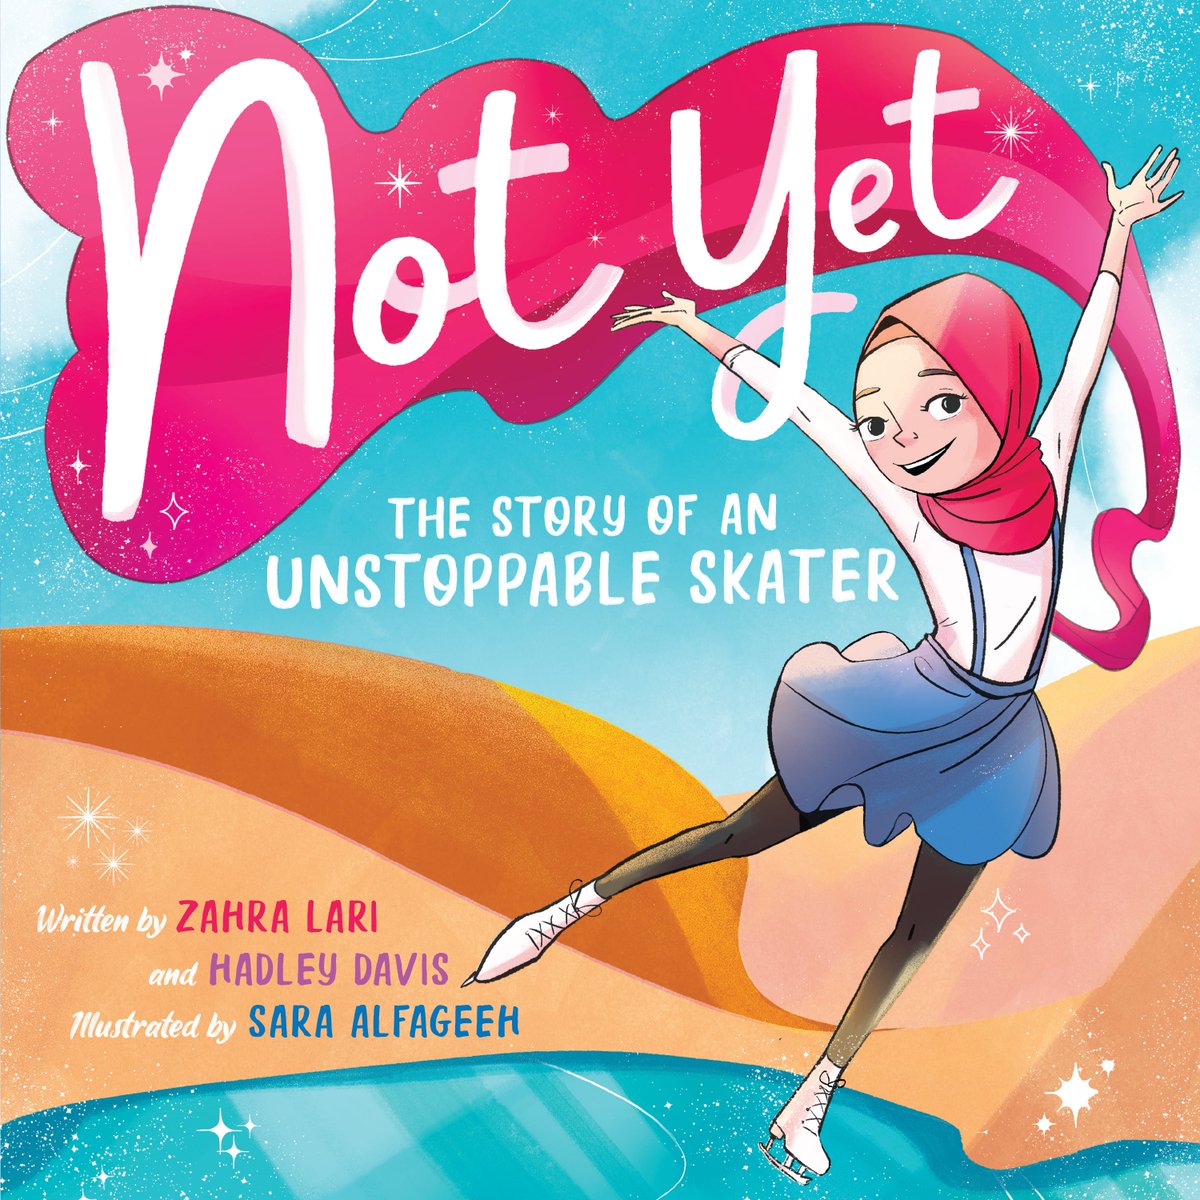 It is #ArabHeritageMonth! I'm a Jordanian-American author + artist with books to bring to your class, home, or library. ⚔️SQUIRE: YA fantasy graphic novel about a young girl training to become a knight. ❄️NOT YET: The true story of Zahra Lari-- 1st ice skater to compete in hijab!